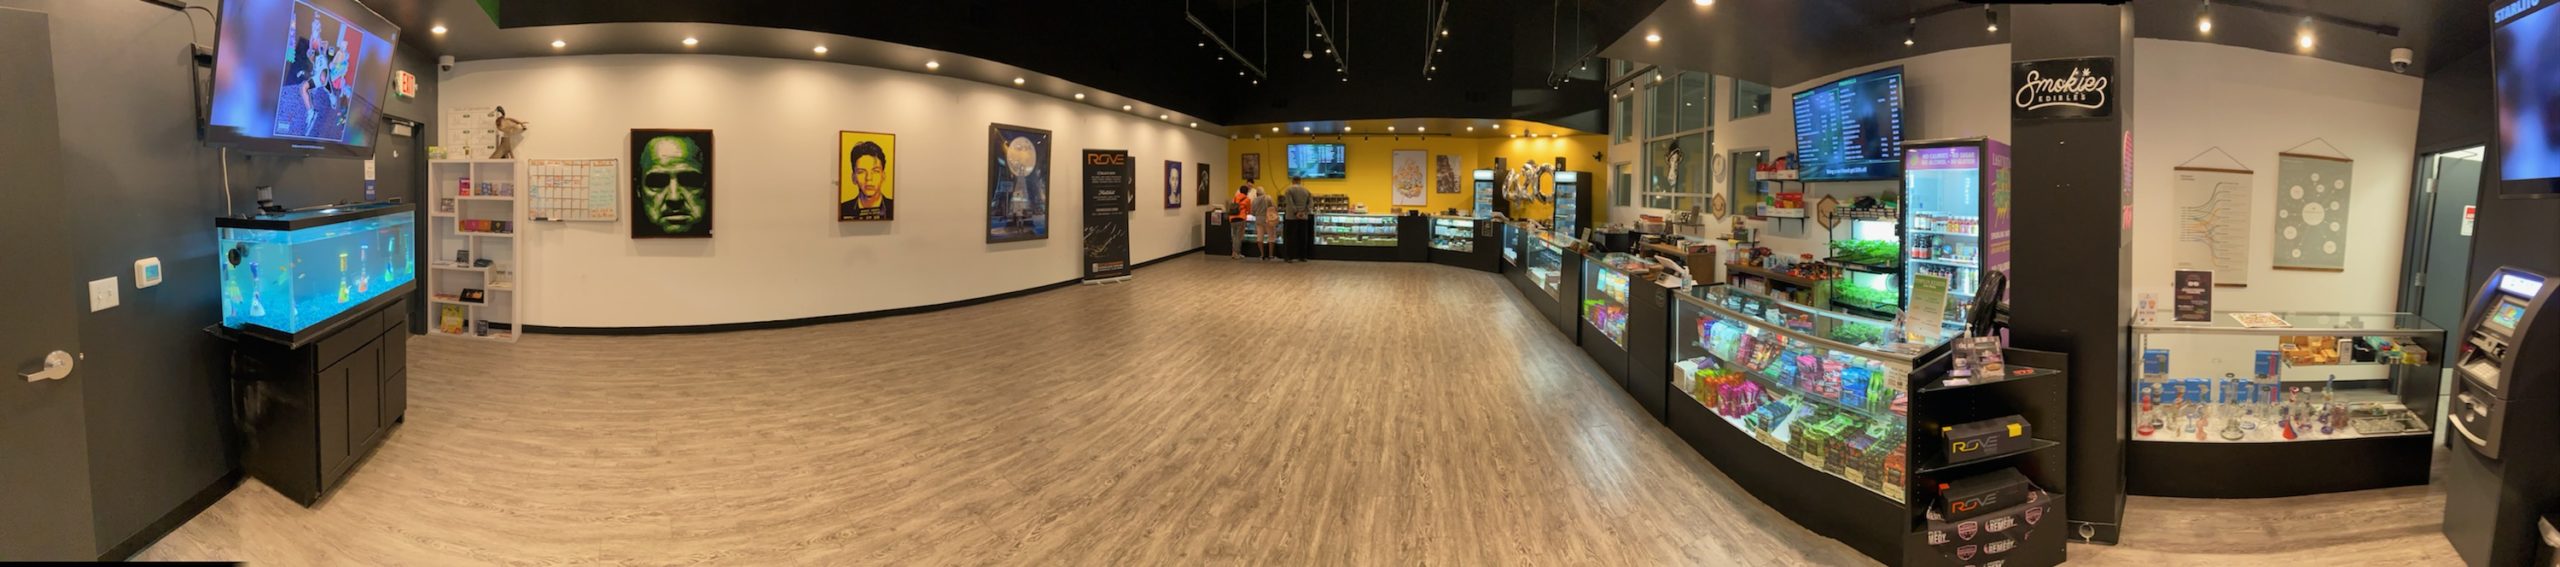 Panoramic view of peoples remedy lone palm ave, modesto dispensary sales floor